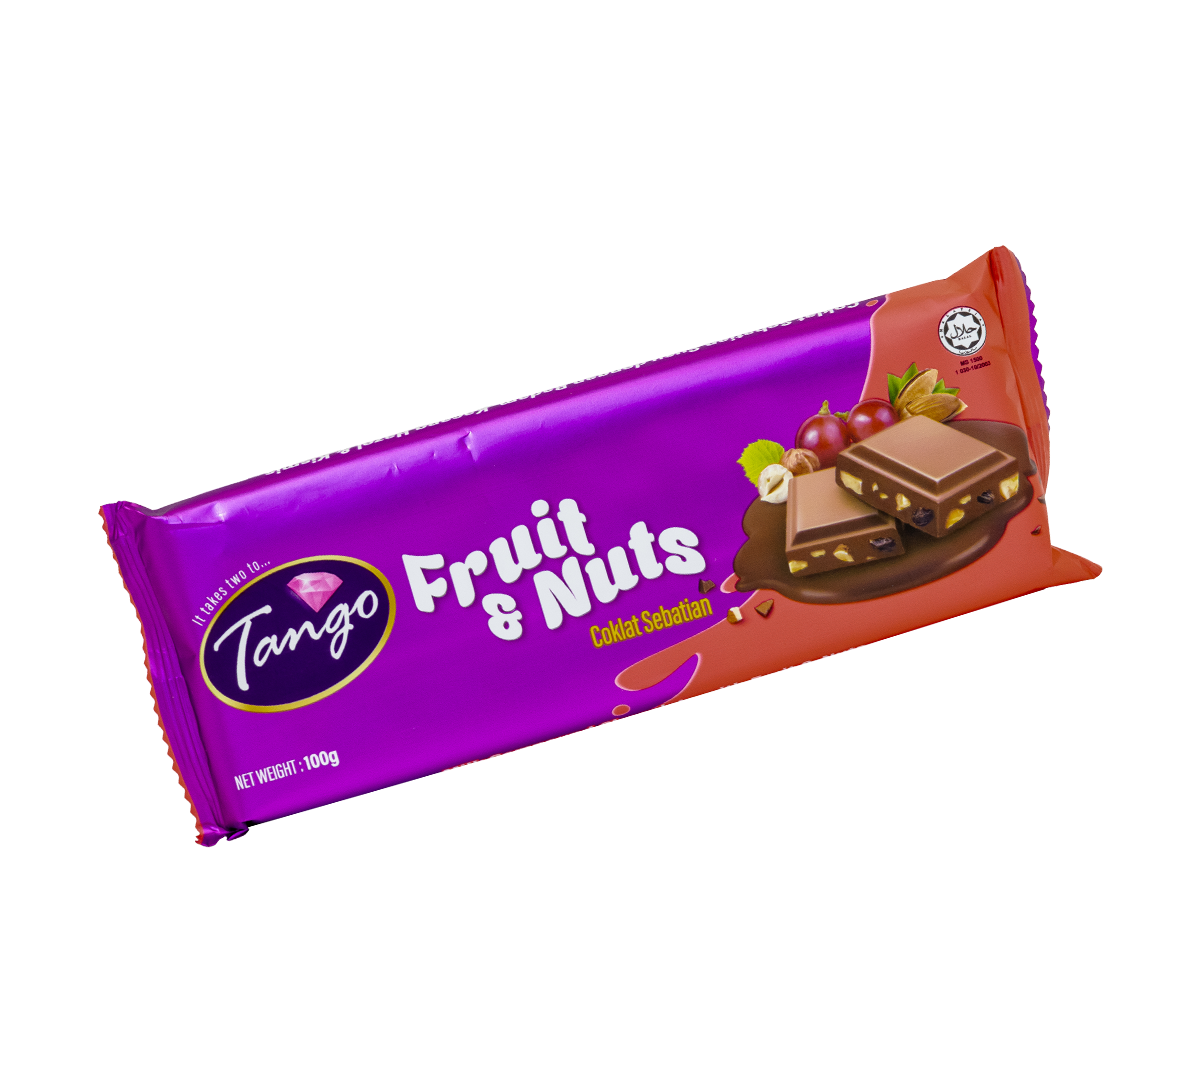 Tango Flow wrap Fruit and Nuts Chocolate 100g